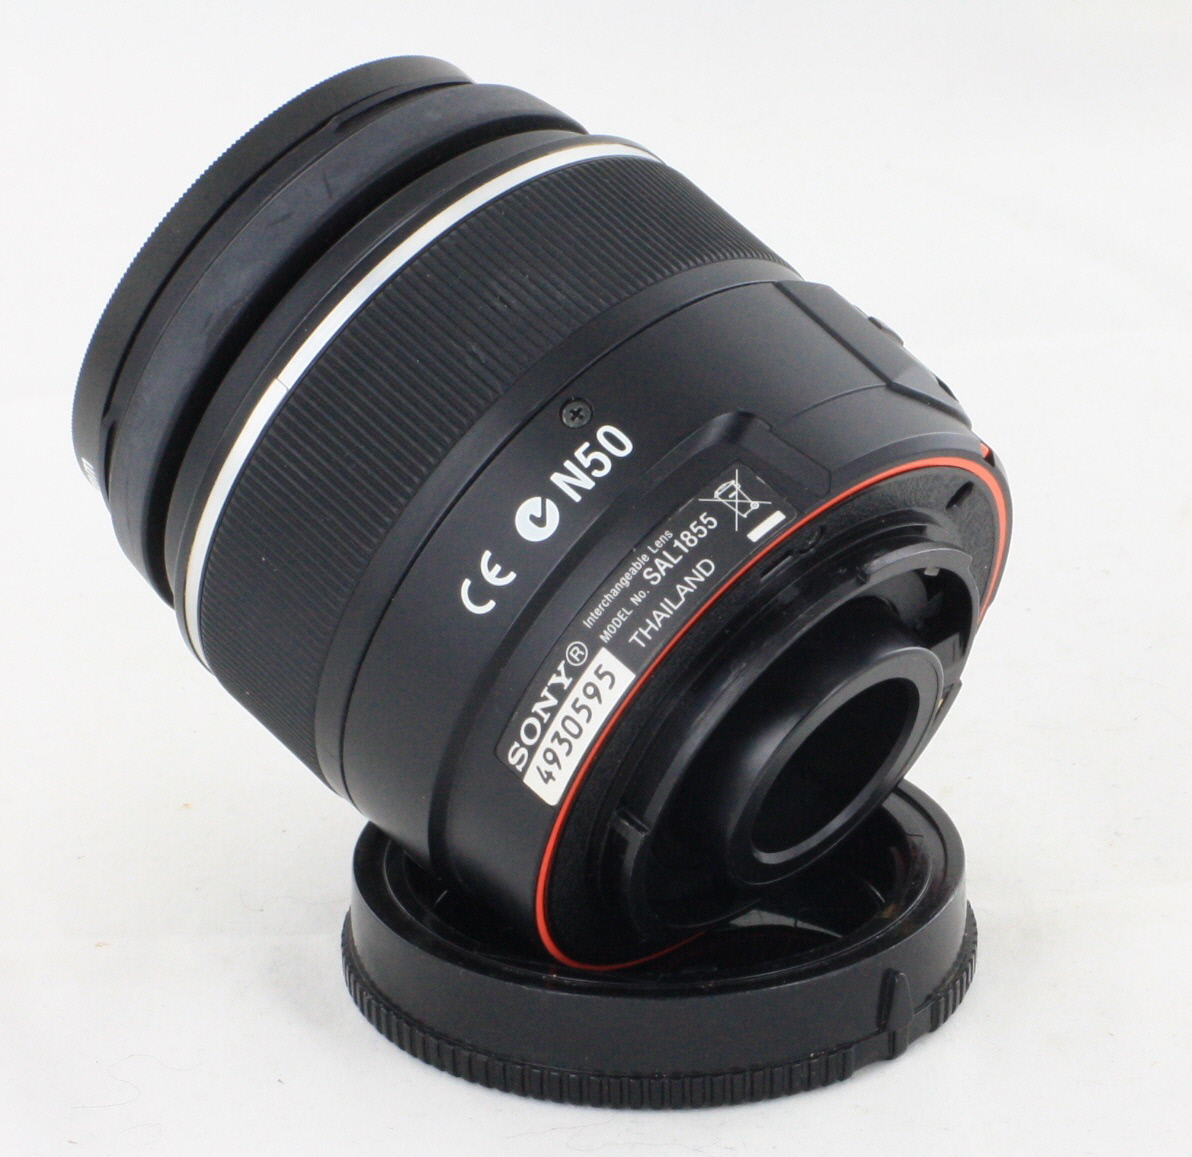 Sony DT 18-70mm F3.5-5.6 Alpha lens for Sony A mount/Minolta - Camera House